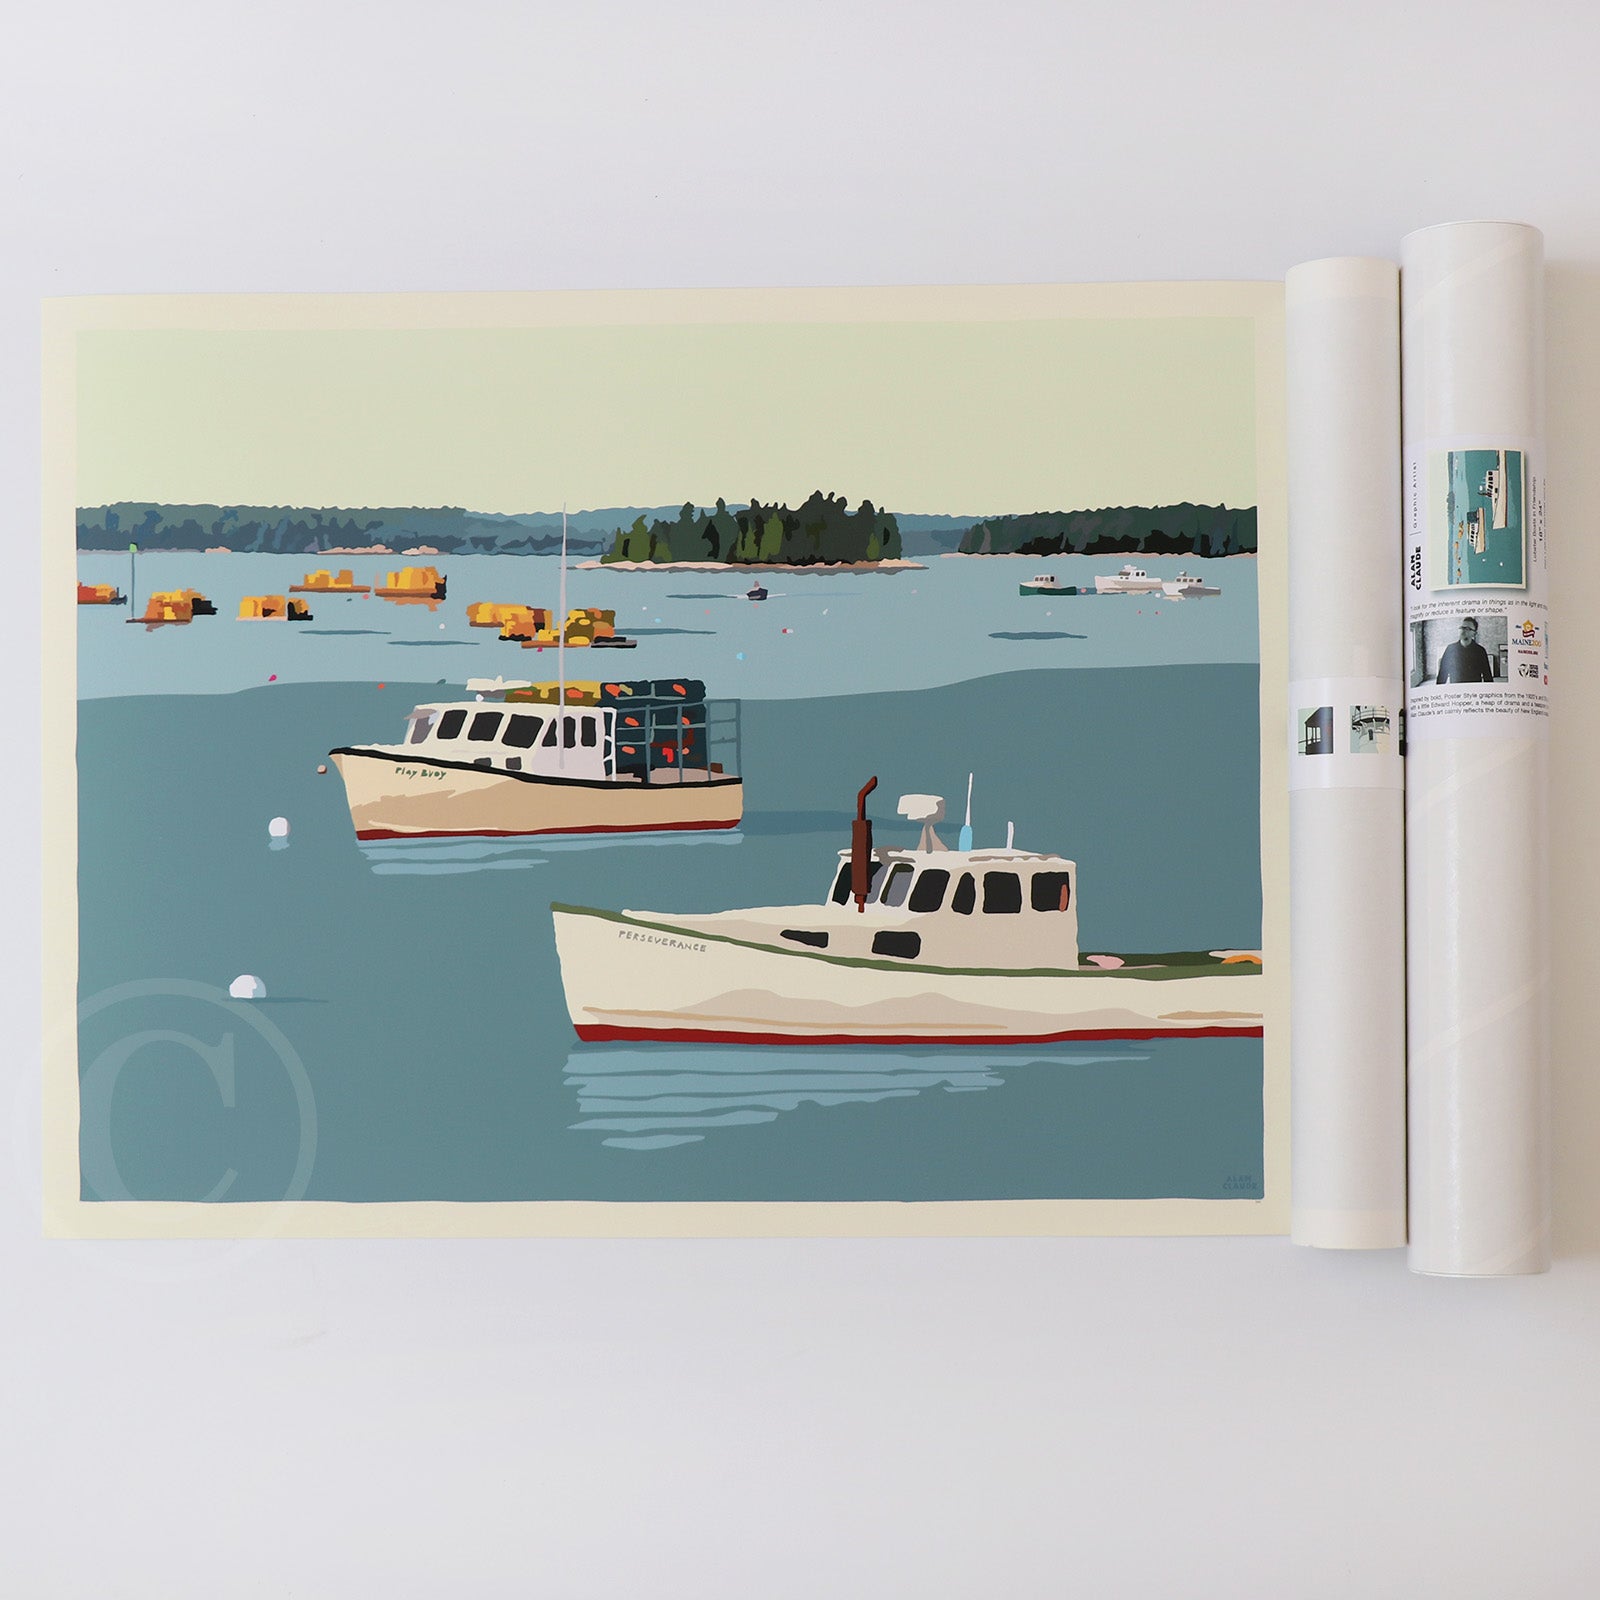 Lobster Boats in Friendship Art Print 18" x 24" Wall Poster By Alan Claude - Maine